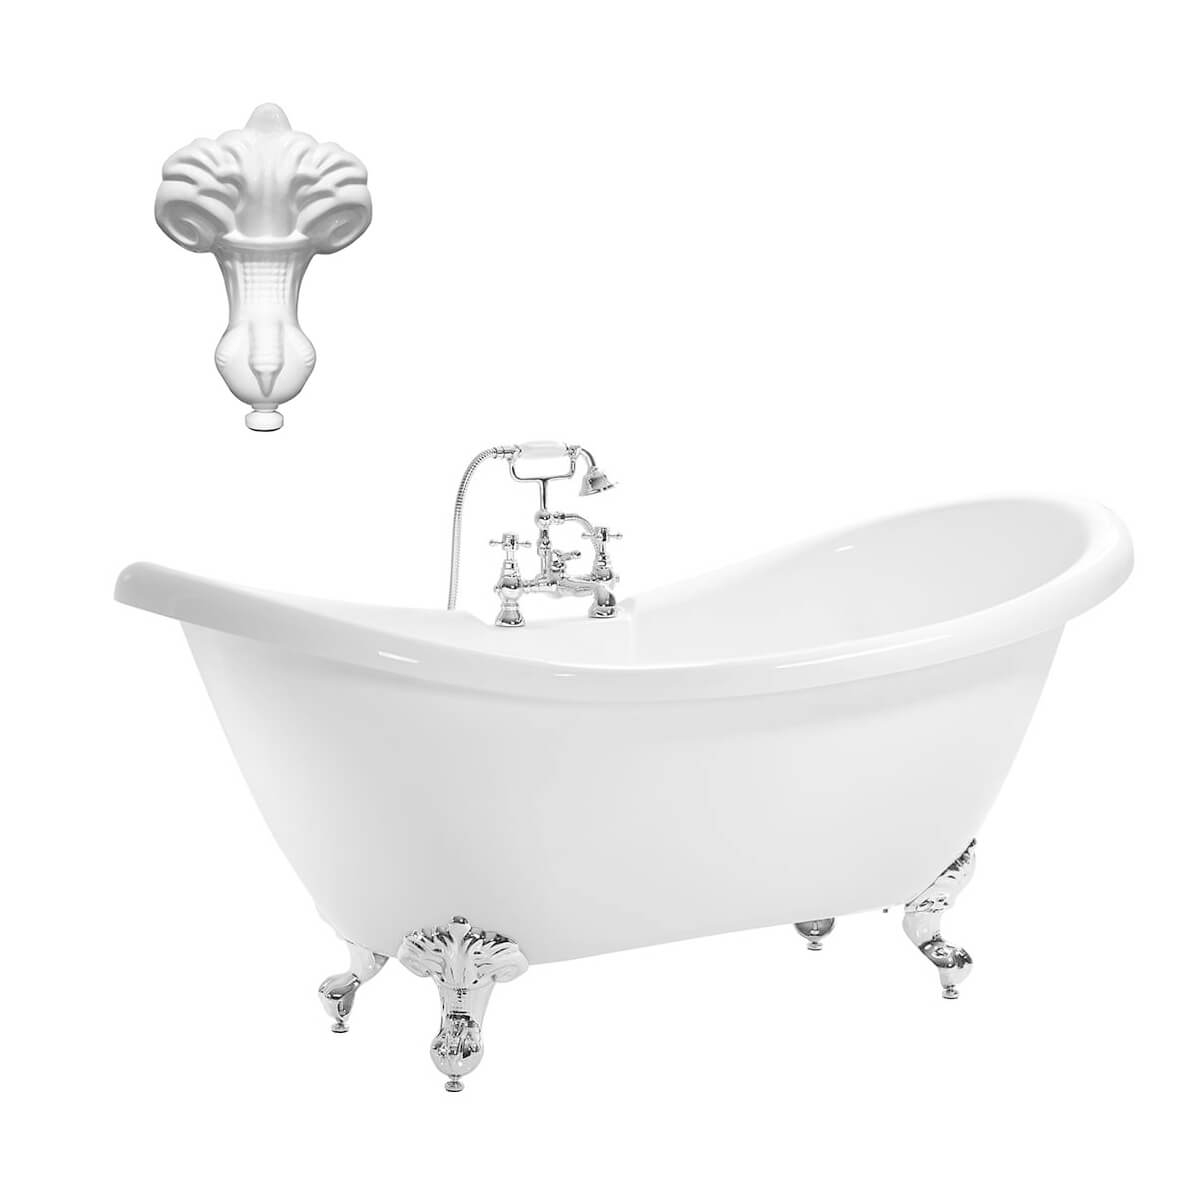 Balmoral 1750mm Double Ended Slipper Bath with White Claw & Ball Feet (11254)